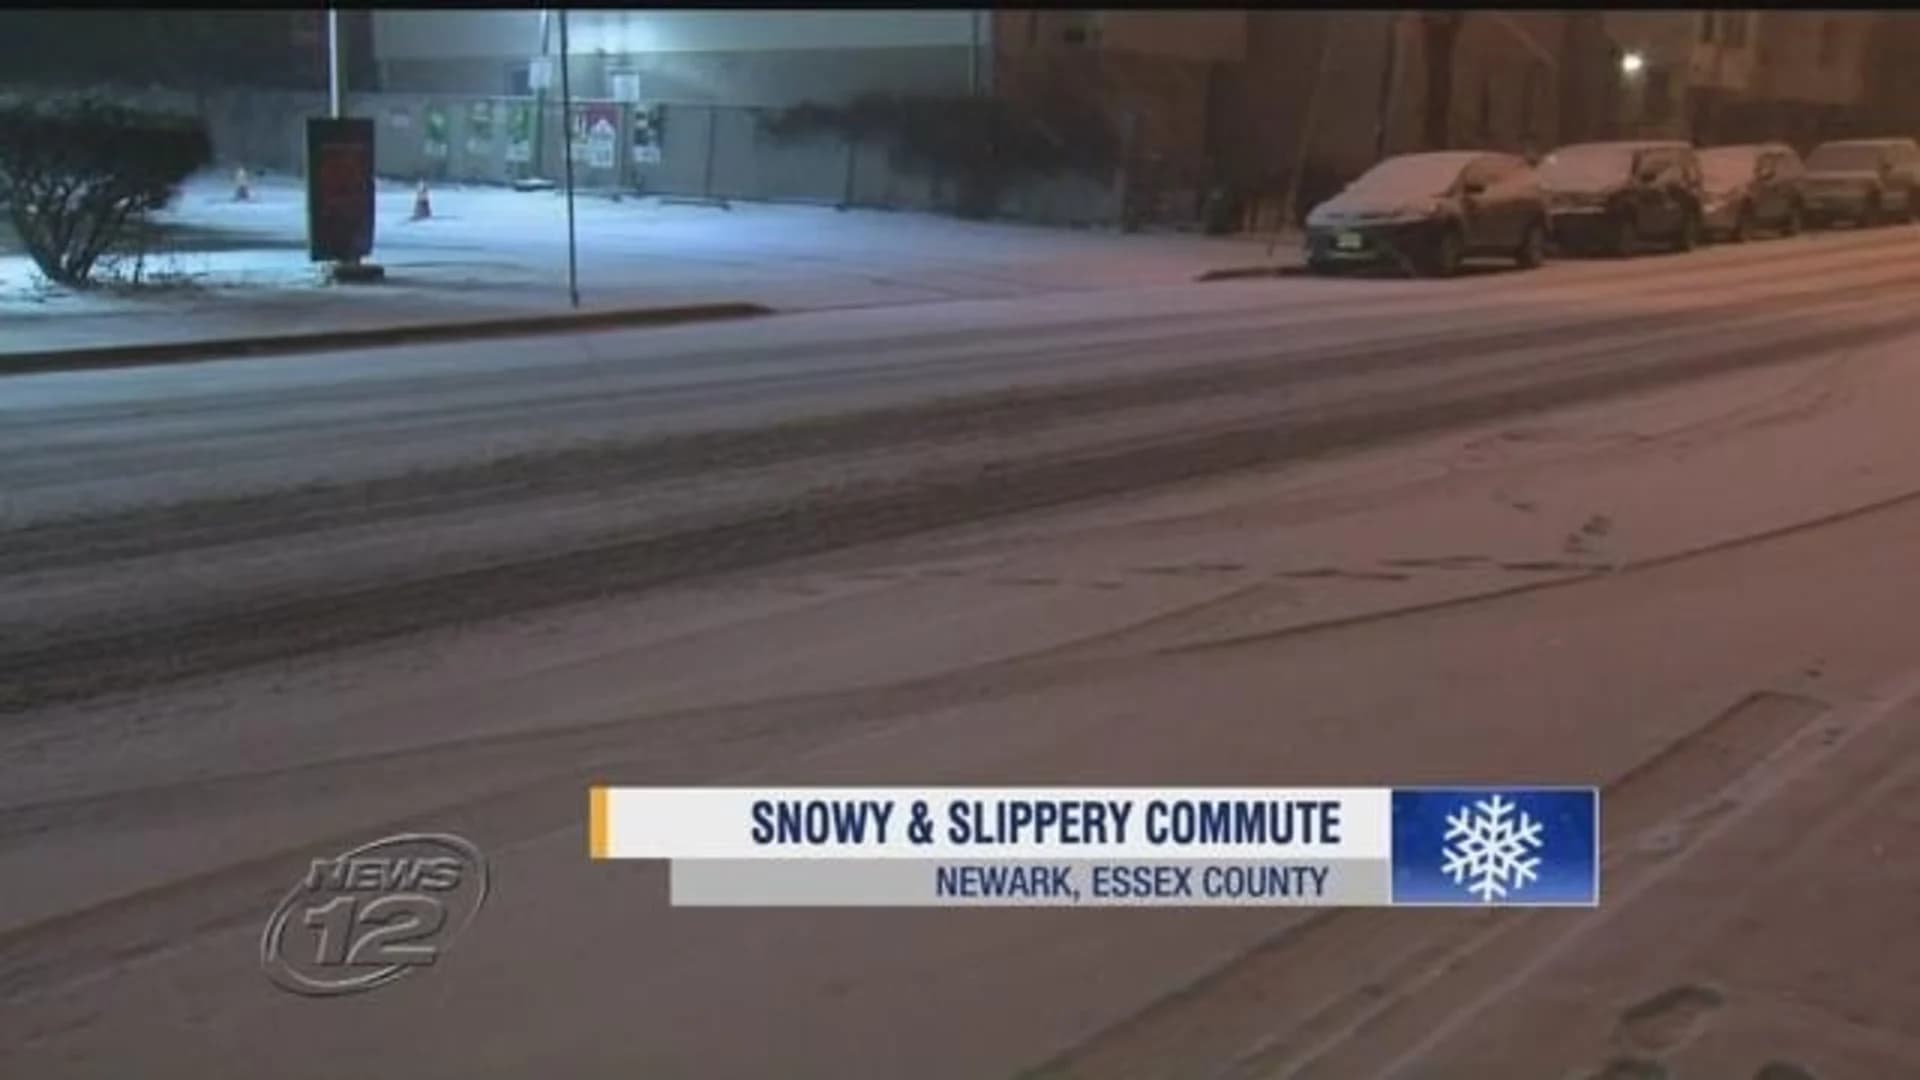 Snow covers roadways in Newark making for slippery commute